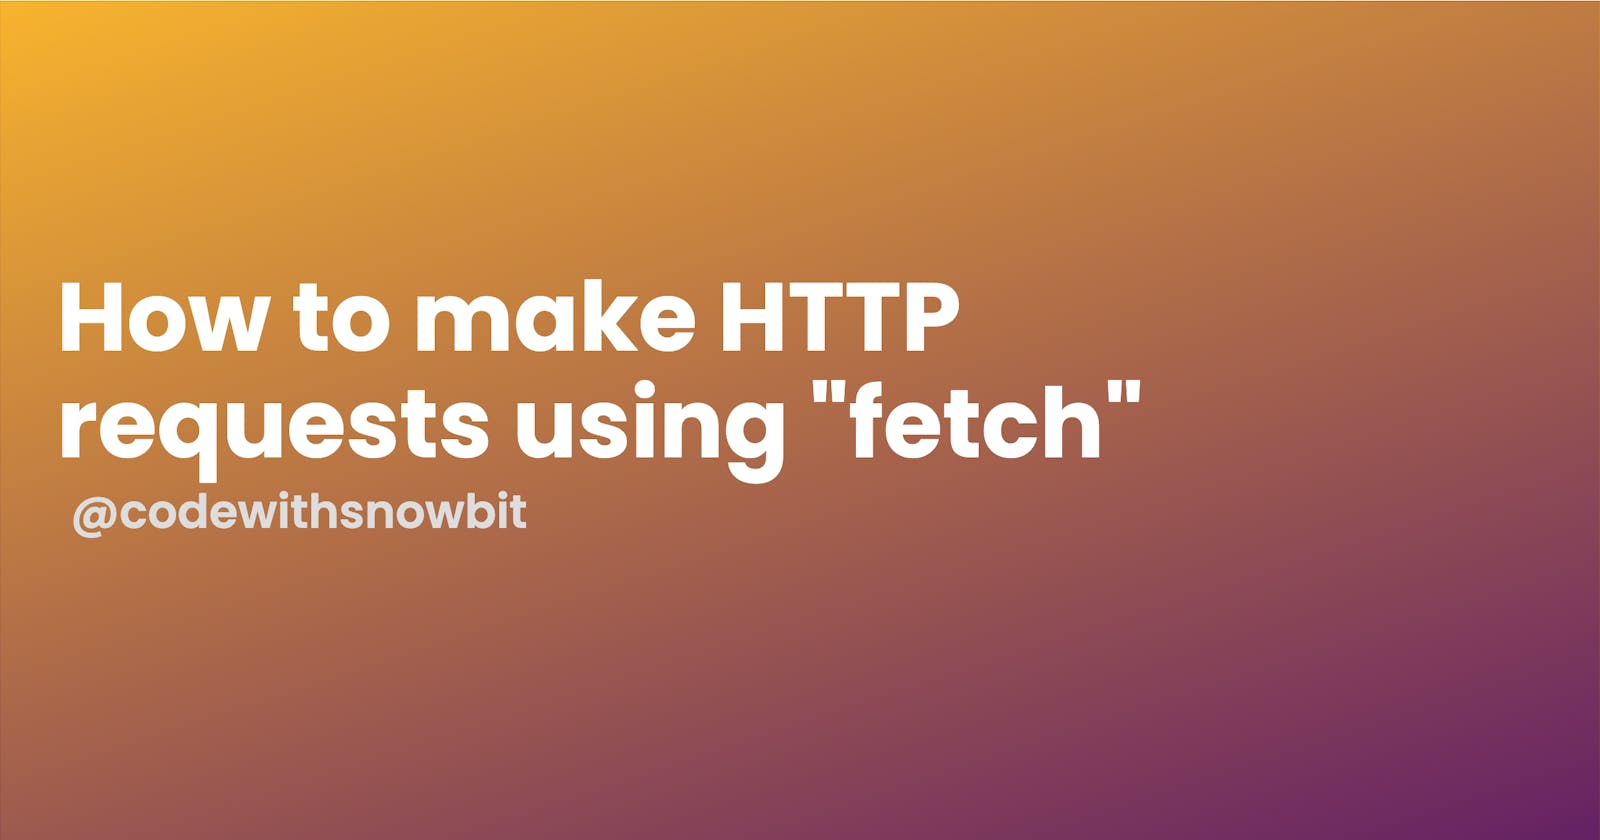 How to make HTTP requests using "fetch"